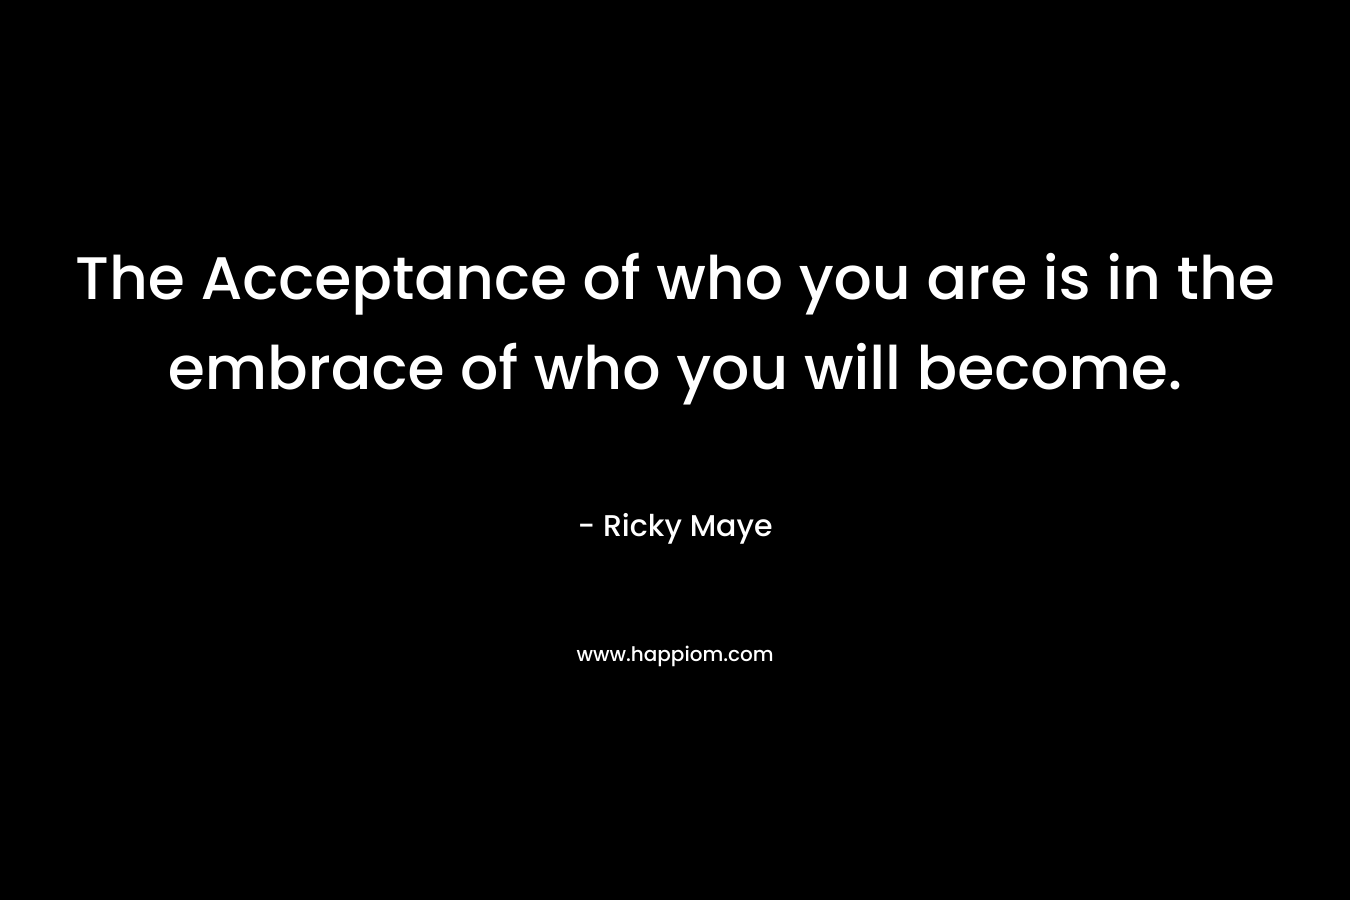 The Acceptance of who you are is in the embrace of who you will become.